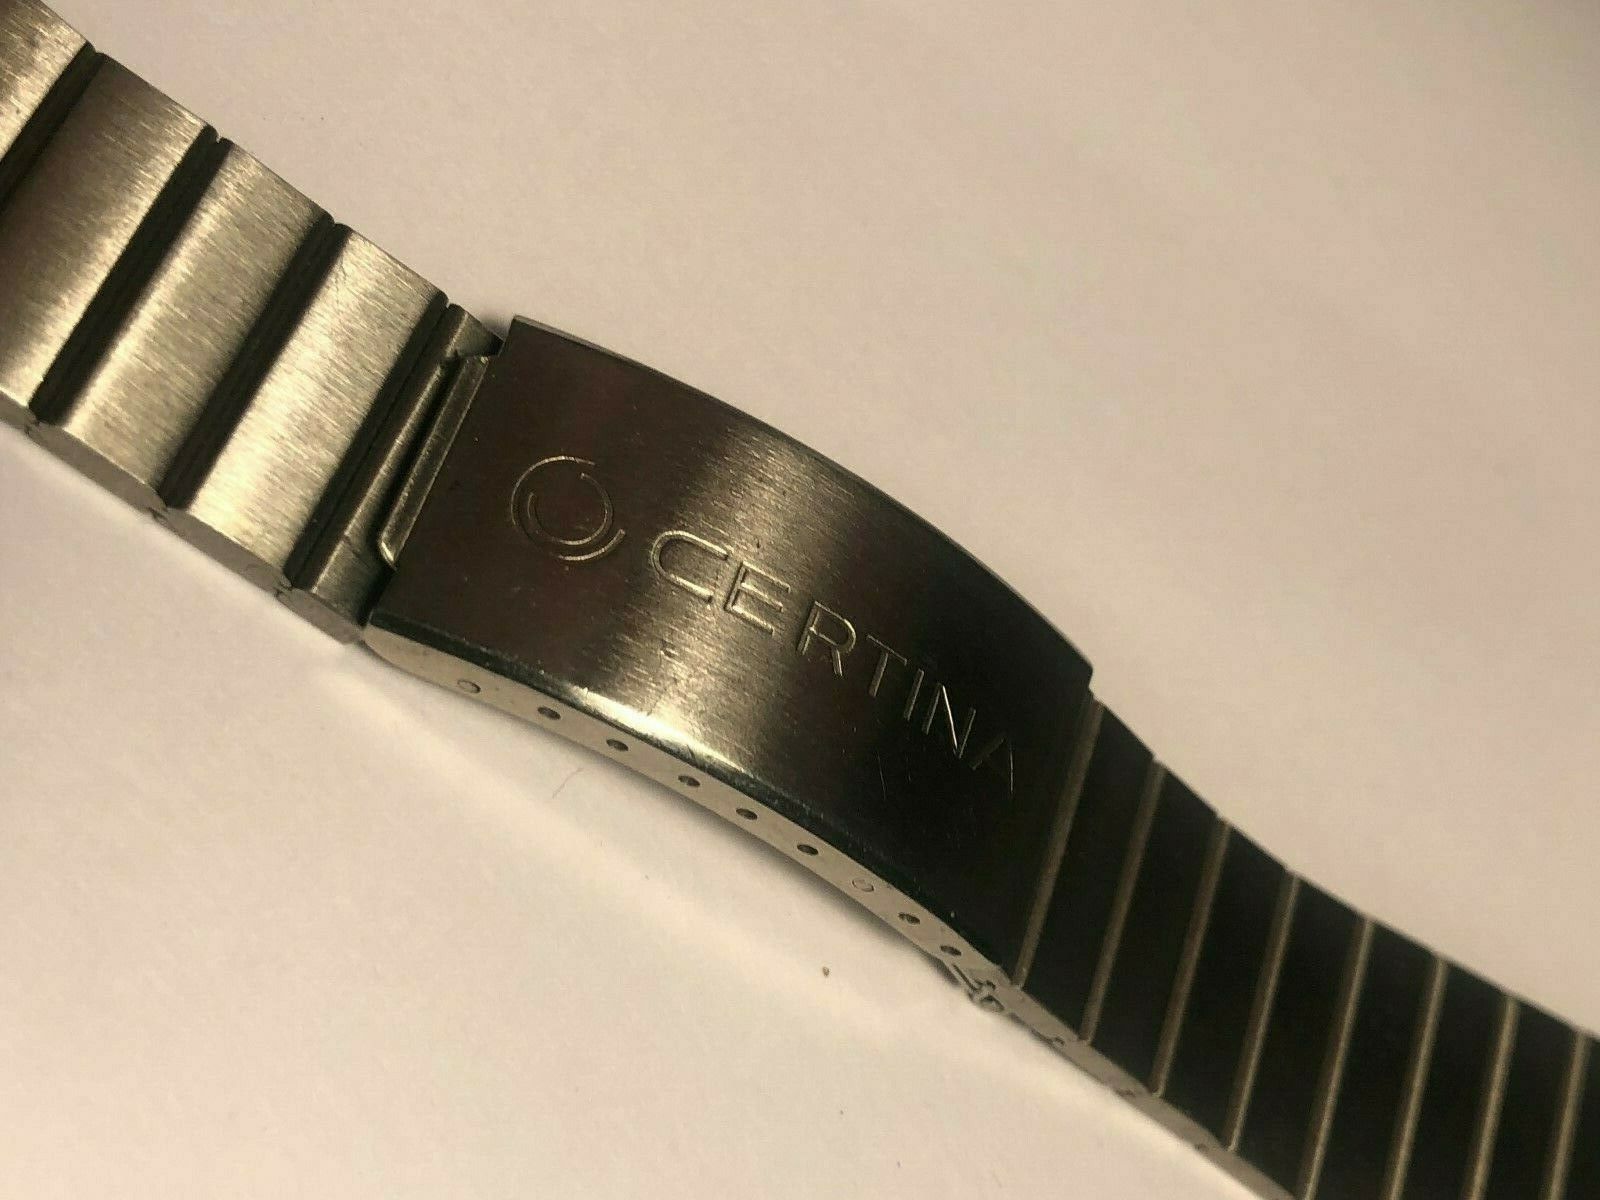 NEW OLD STOCK CERTINA STAINLESS STEEL WRISTWATCH BAND 21mm LUG SIZE REF.# 41446